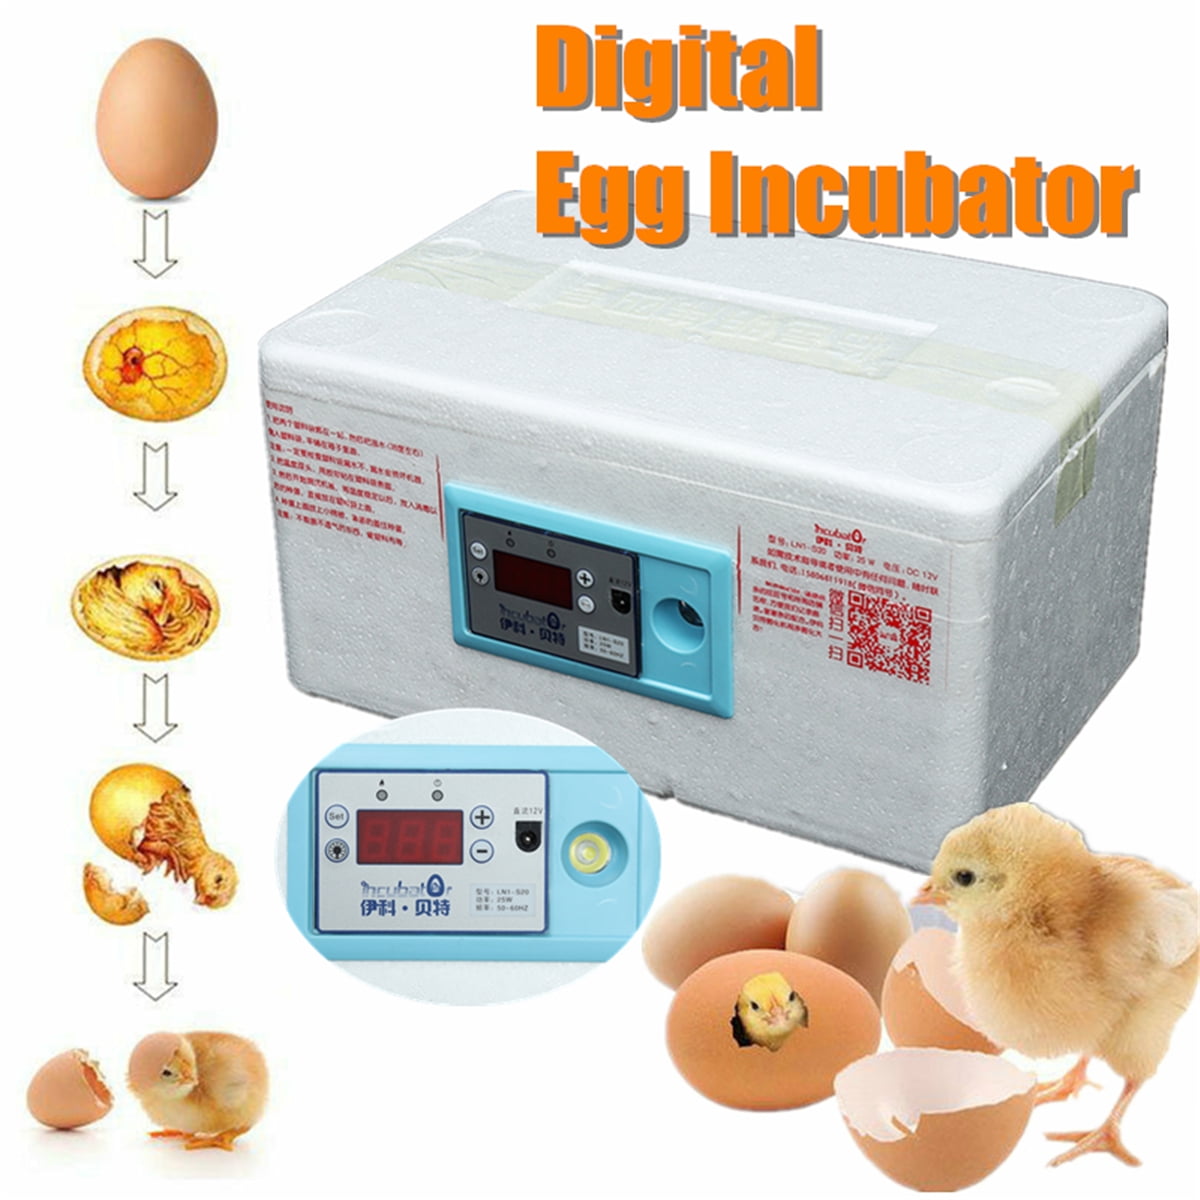 30 Egg Incubator Fully Automatic Digital Poultry Hatcher Machine Breeder with Temperature Control and Auto Turning Clear Large Incubators Poultry Egg Hatching Machine Breeder for Hatching Chicken 